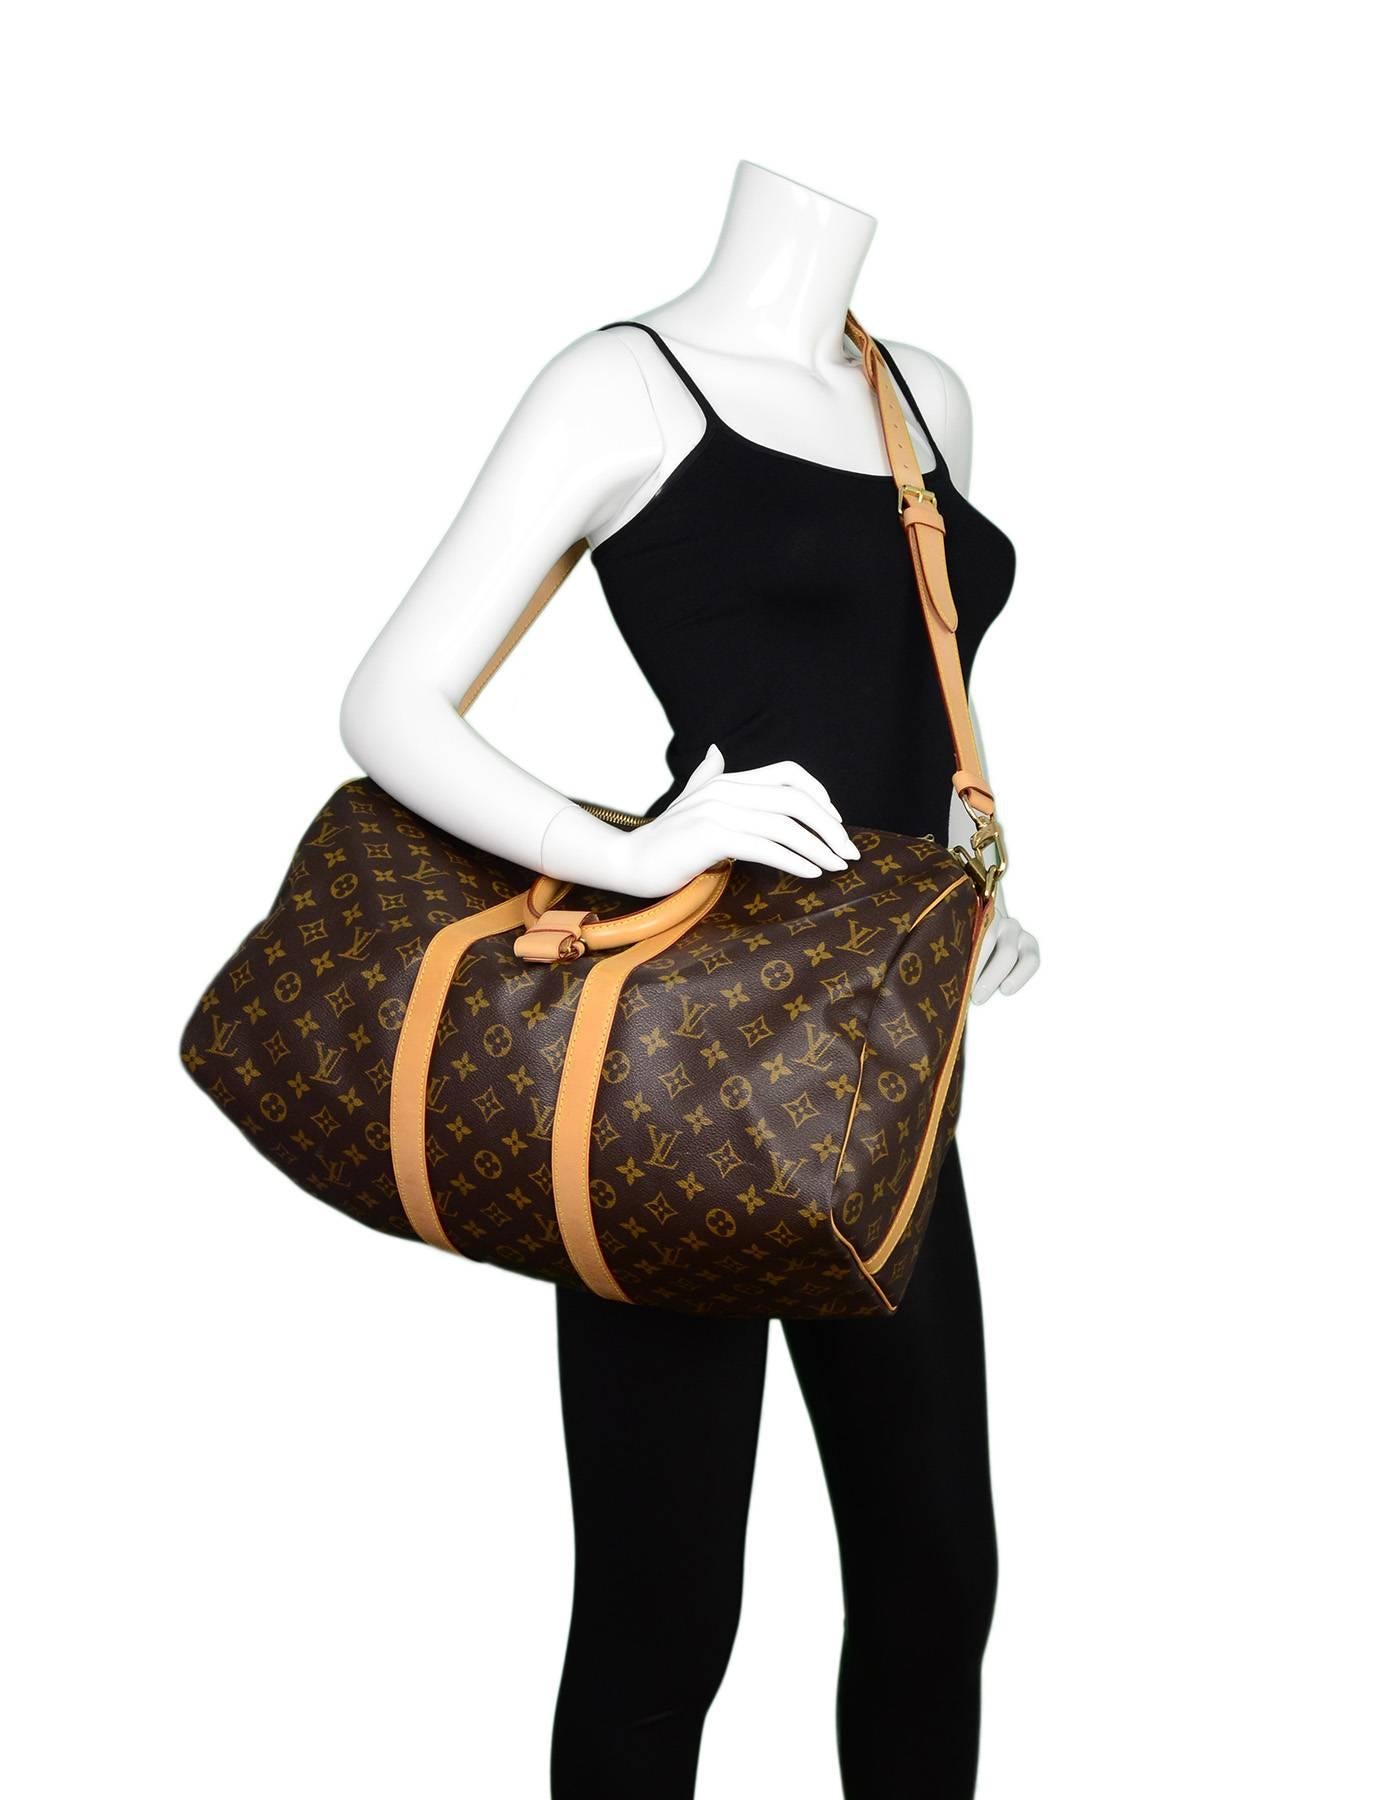 Louis Vuitton Monogram Keepall 45 

Made In: France
Year of Production: 1998
Color: Brown and tan
Hardware: Goldtone
Materials: Coated canvas and leather
Lining: Brown canvas
Closure/Opening: Double zip across top
Exterior pockets: none
Interior